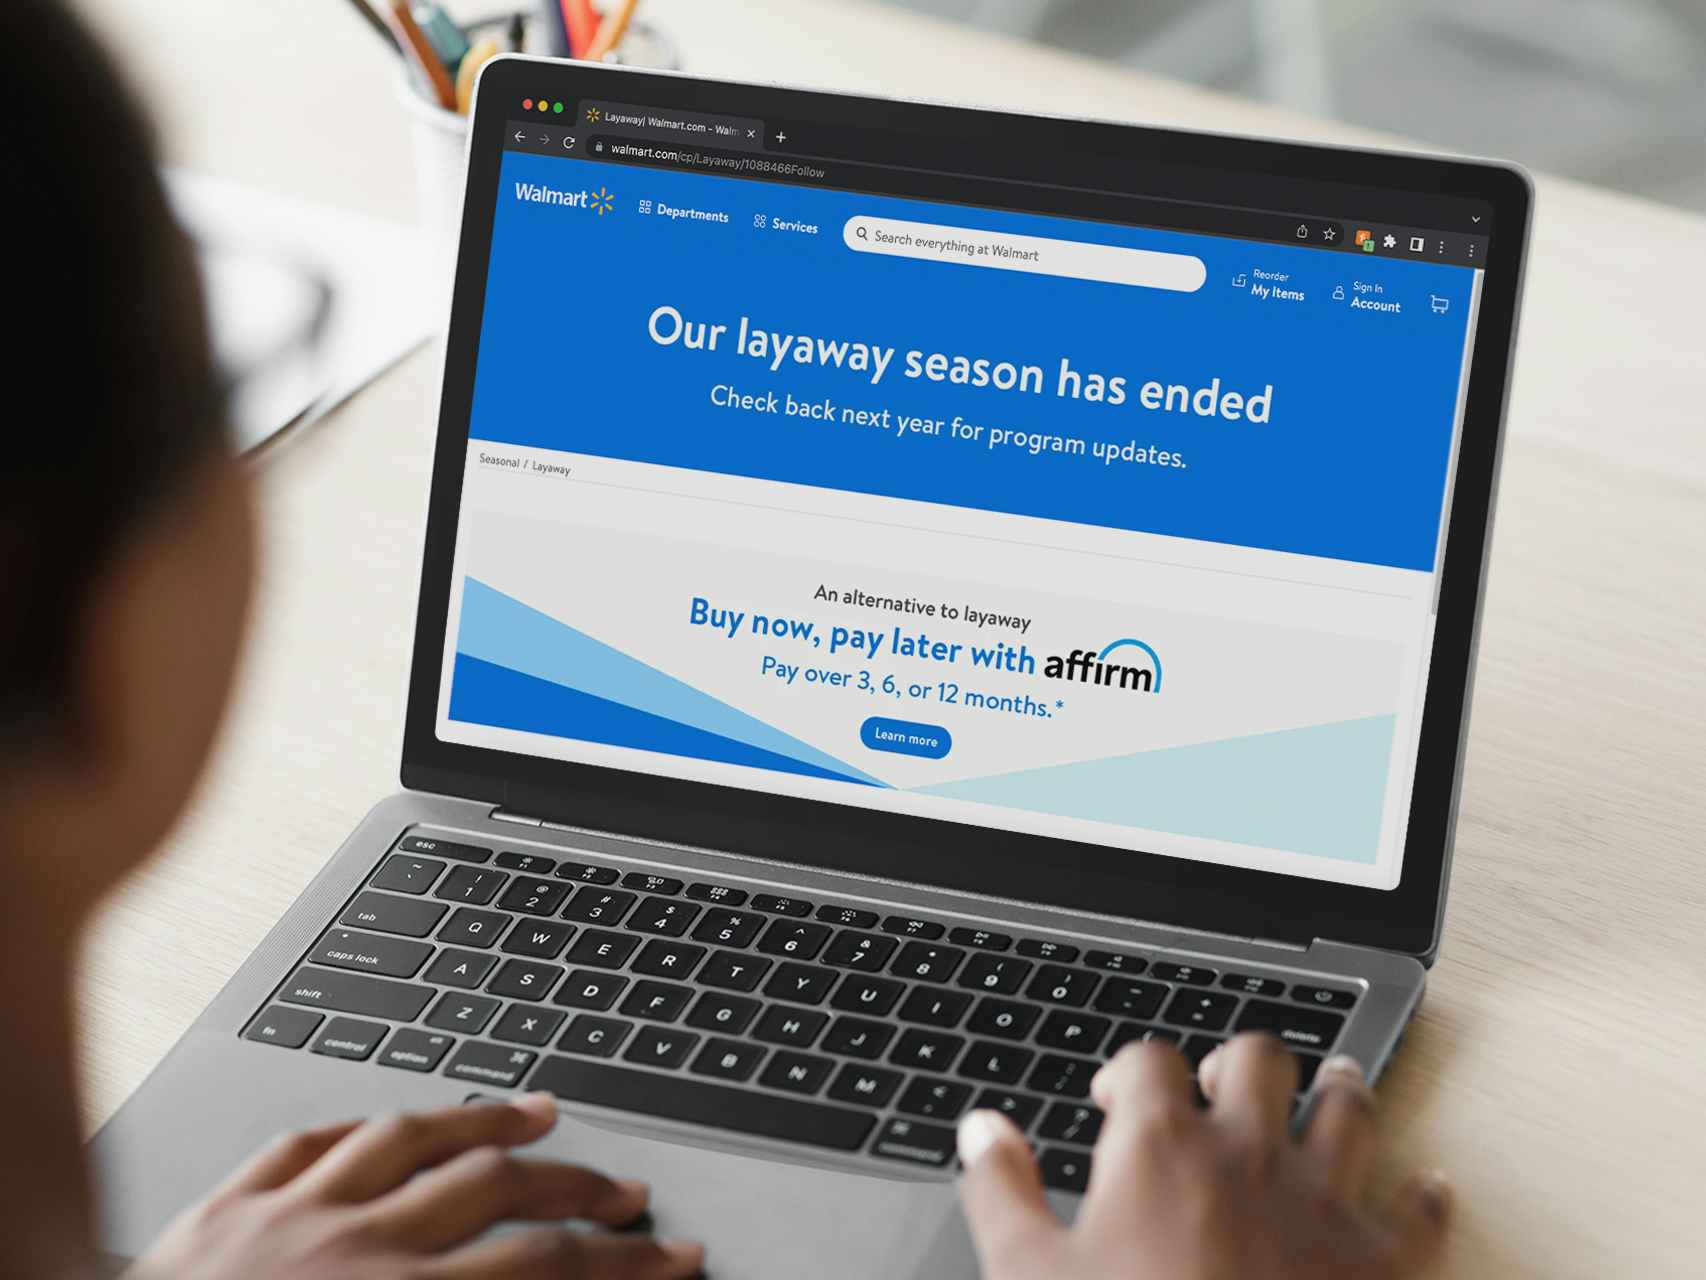 A person using a laptop displaying the Walmart Layaway page on their website which reads, "Our layaway program has ended. Check back next year for program updates" and an advertisement for Affirm below the message.